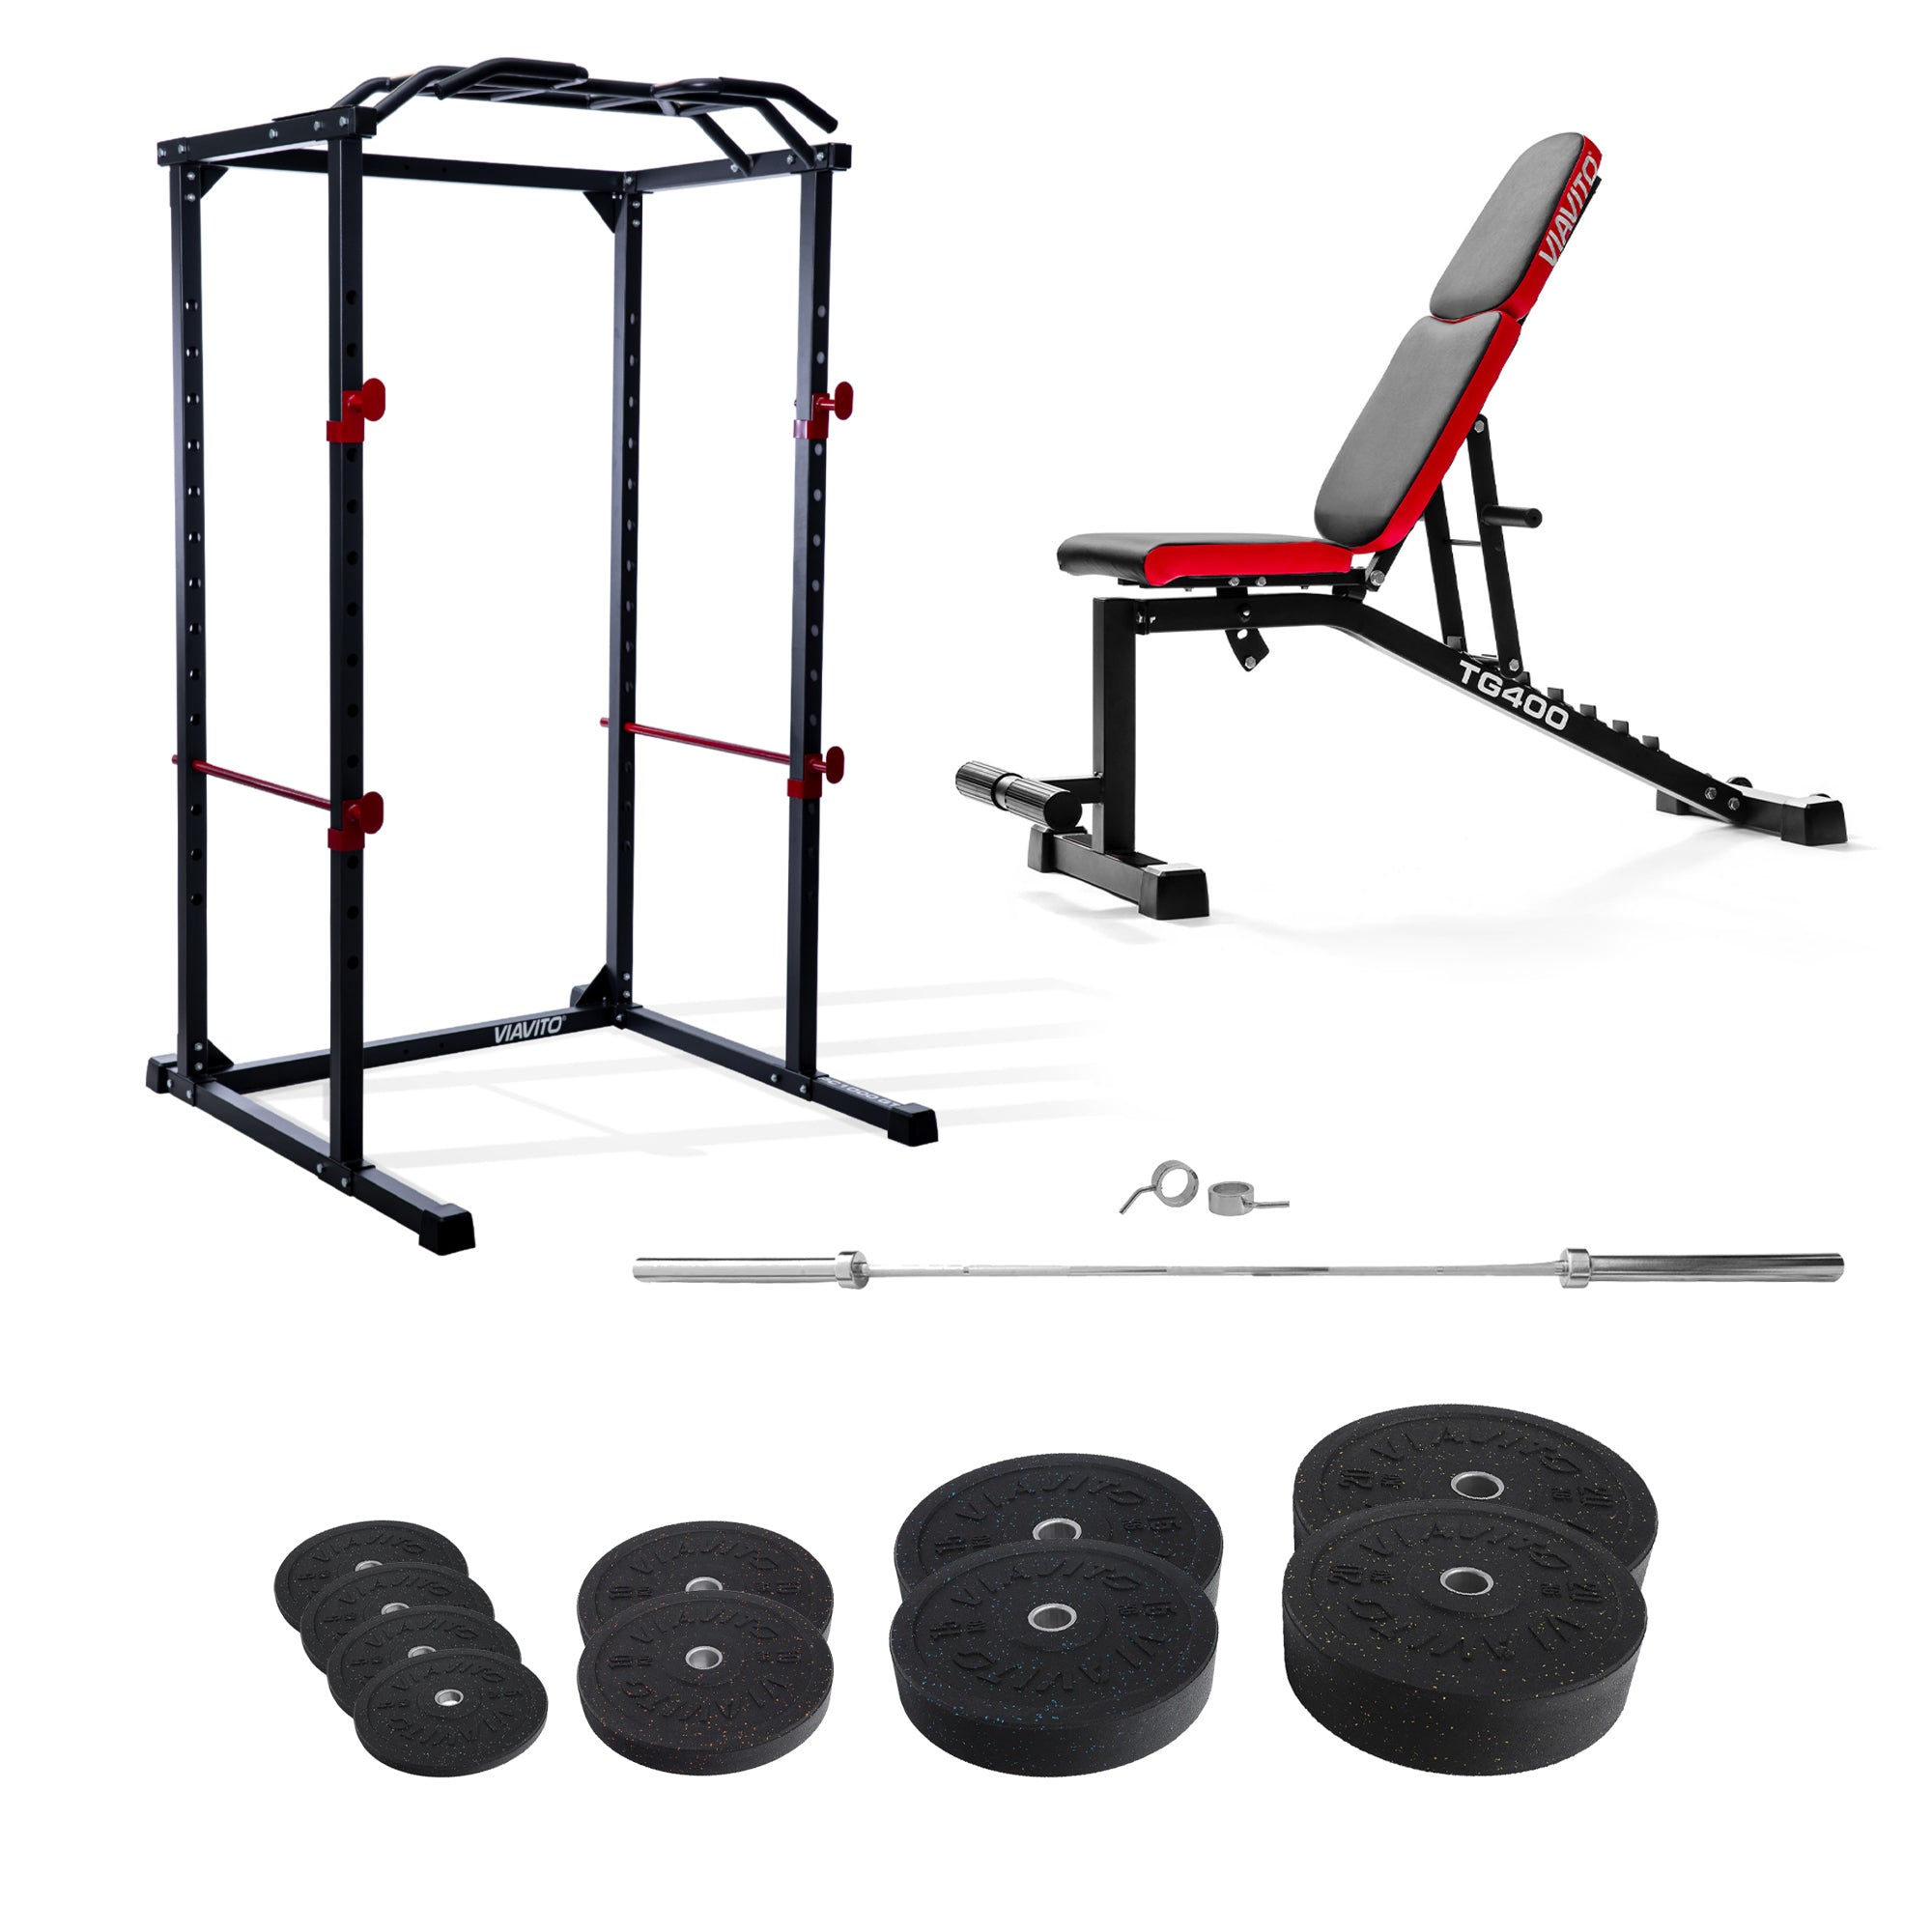 Image of Viavito Home Gym and 130kg Rubber Crumb Bumper Olympic Weight Set